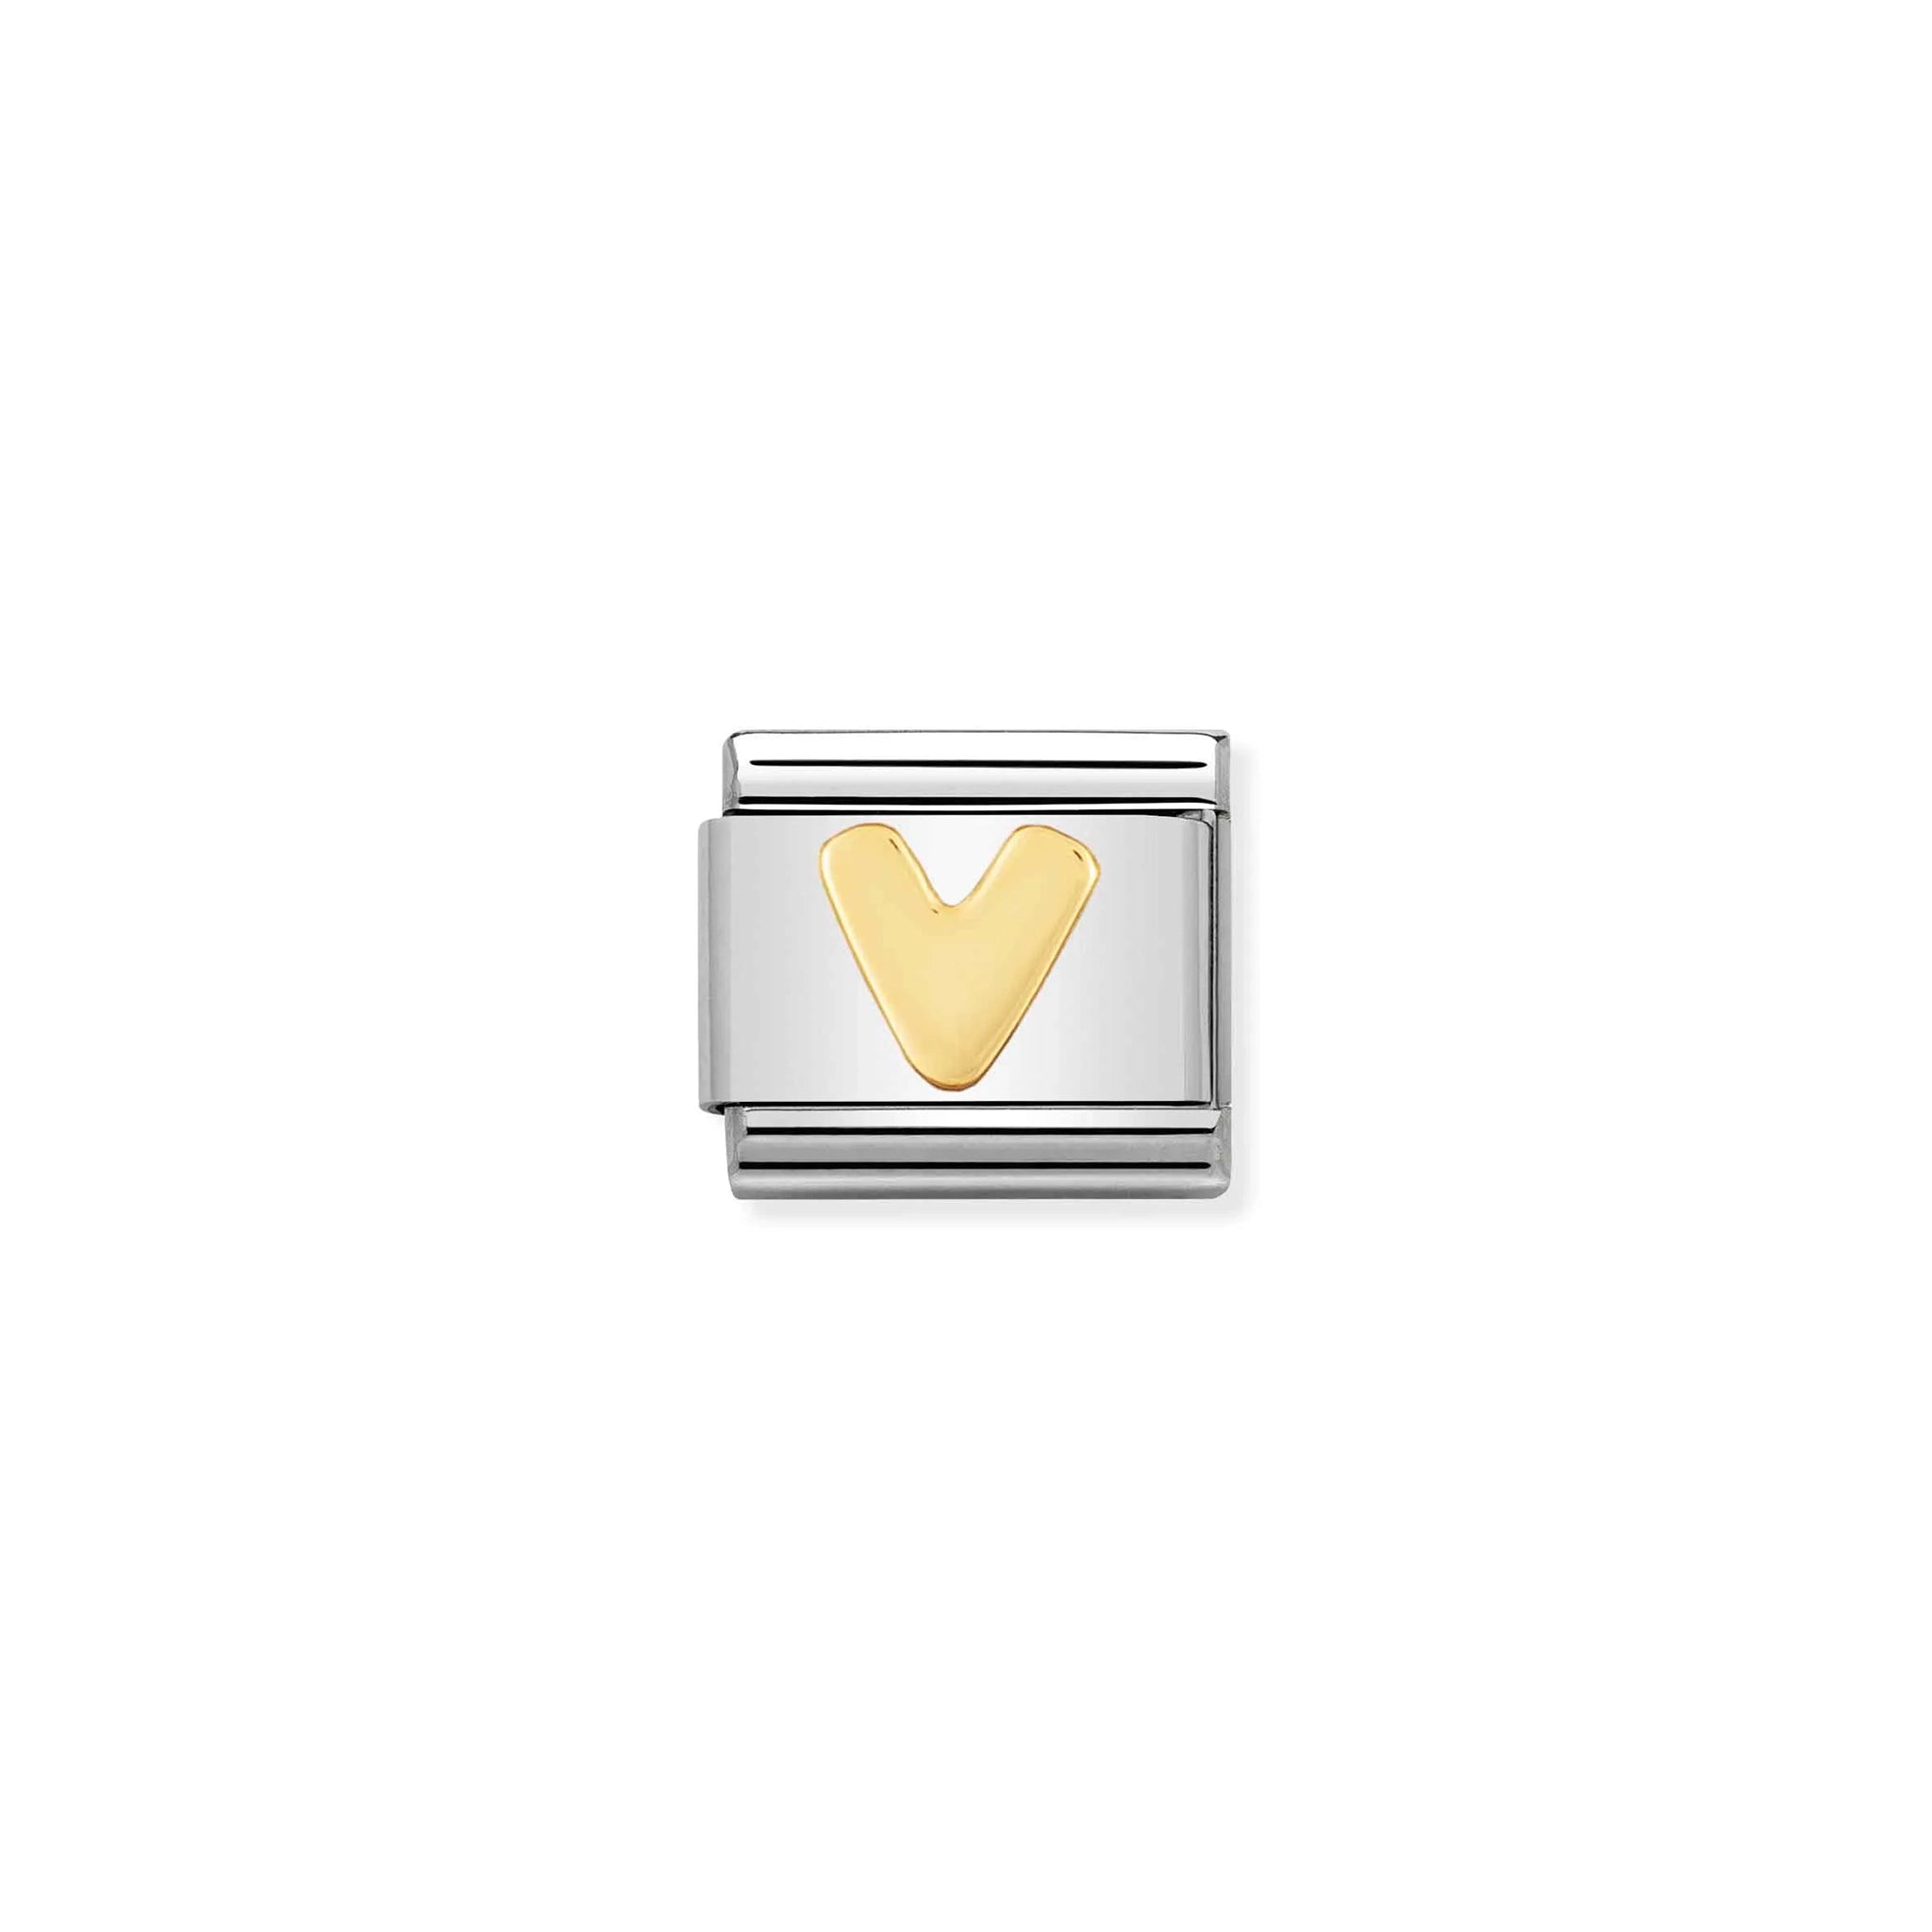 A Nomination charm link featuring a gold letter 'V'